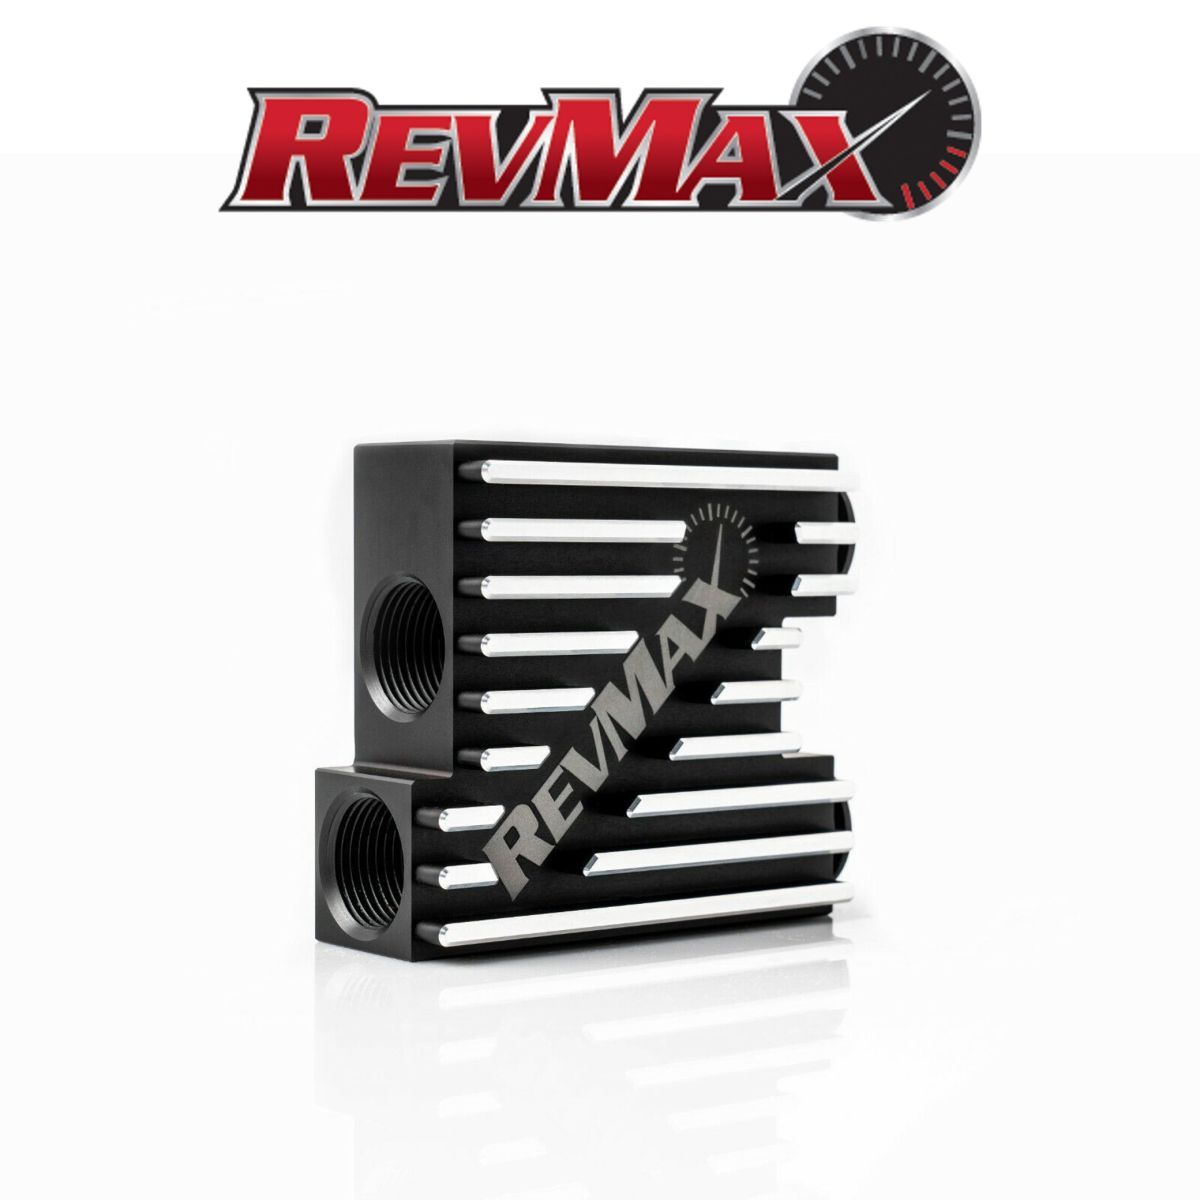 Revmax - RevMax Transmission Cooler Thermostatic Bypass 2013-2018 6.7L Cummins 68RFE/AS69